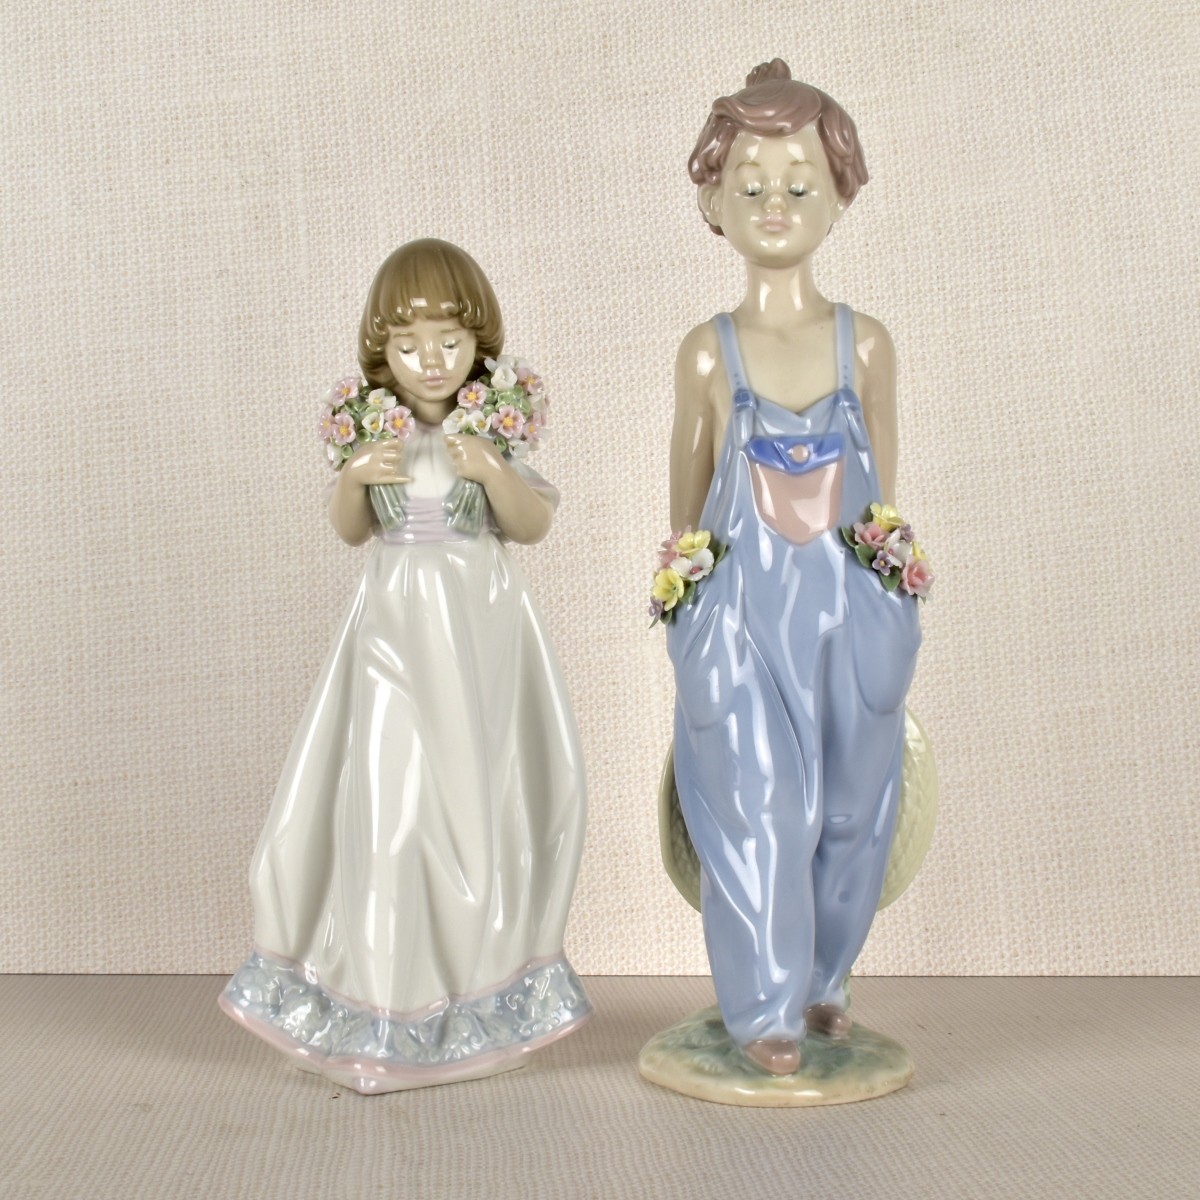 Lladro Figurines of Young Girls